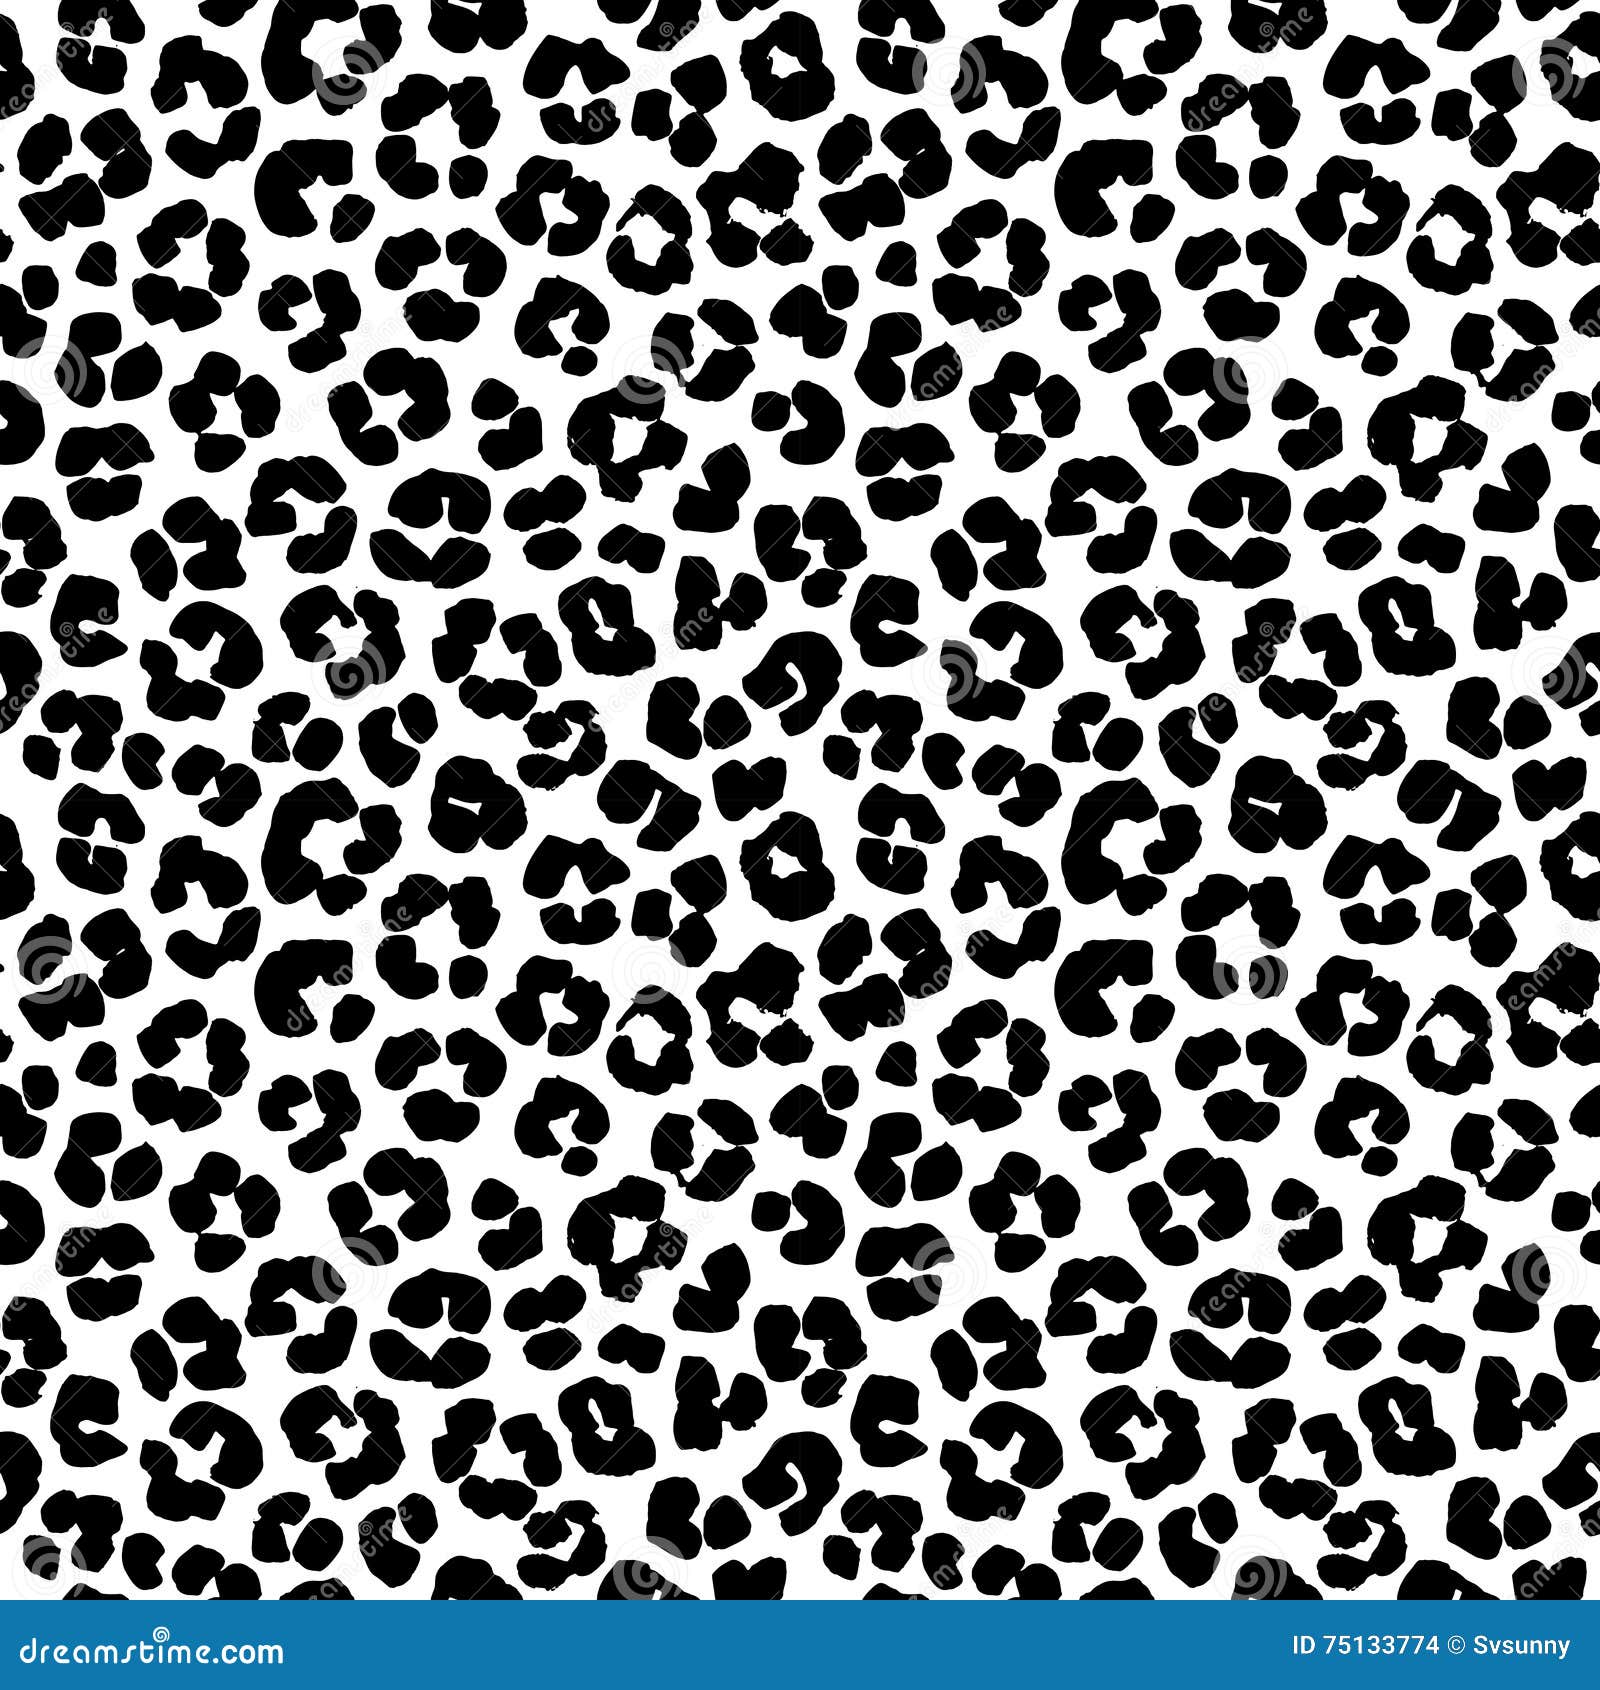 leopard print seamless background pattern. black and white